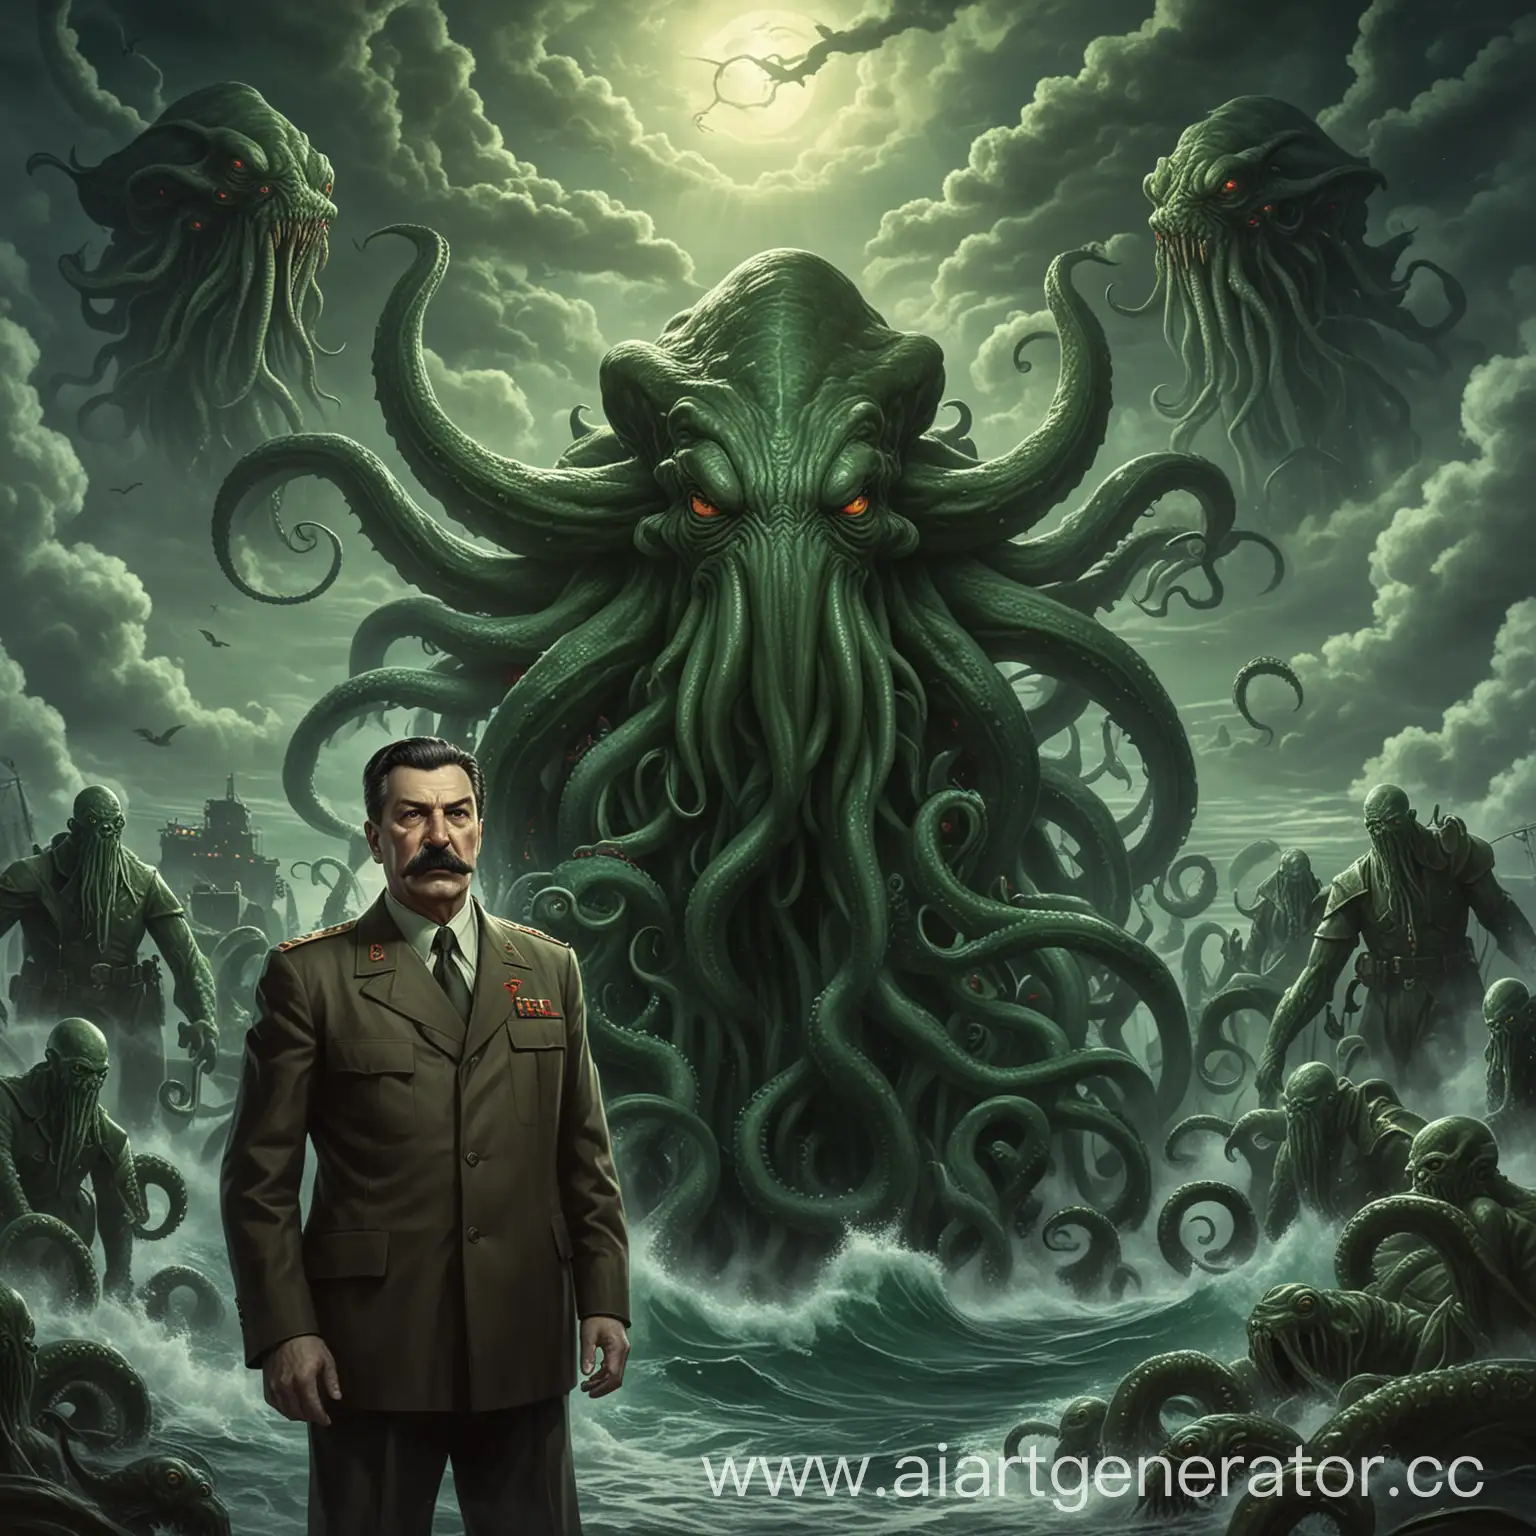 stalin and Cthulhu,lovecraft style